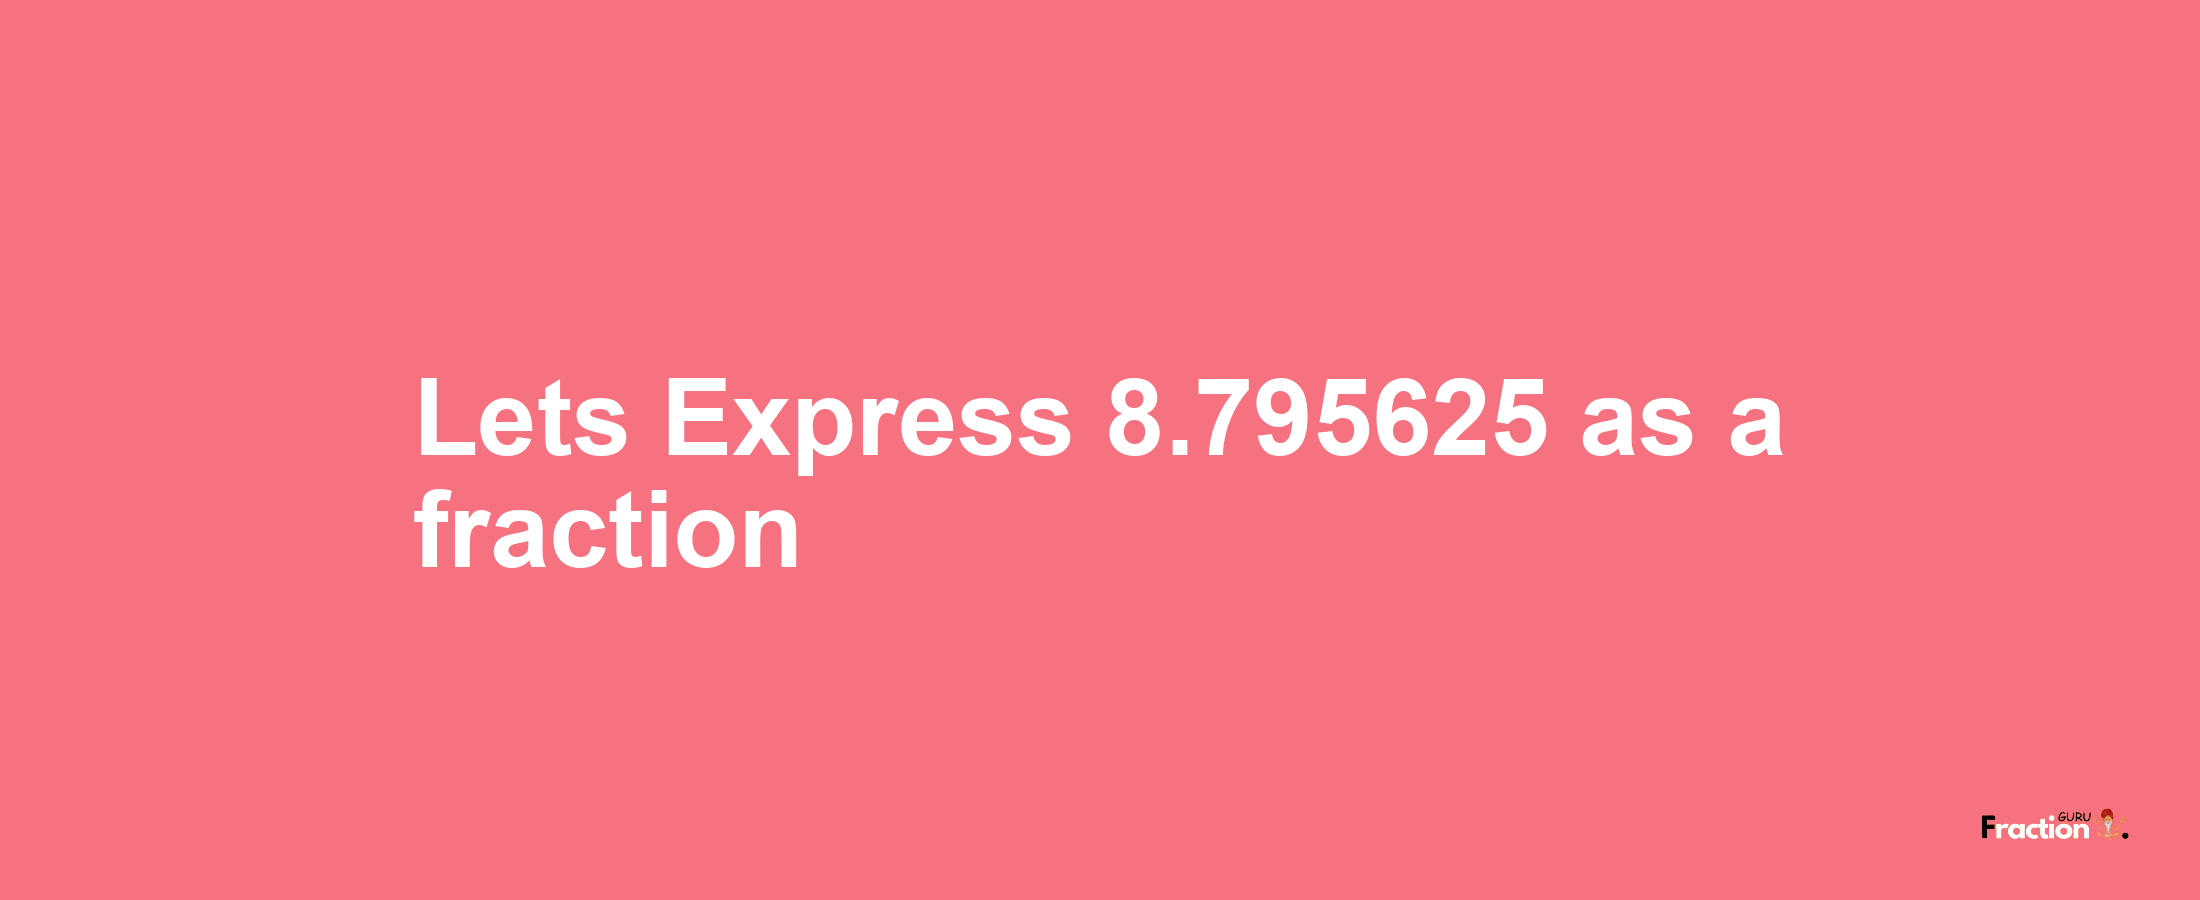 Lets Express 8.795625 as afraction